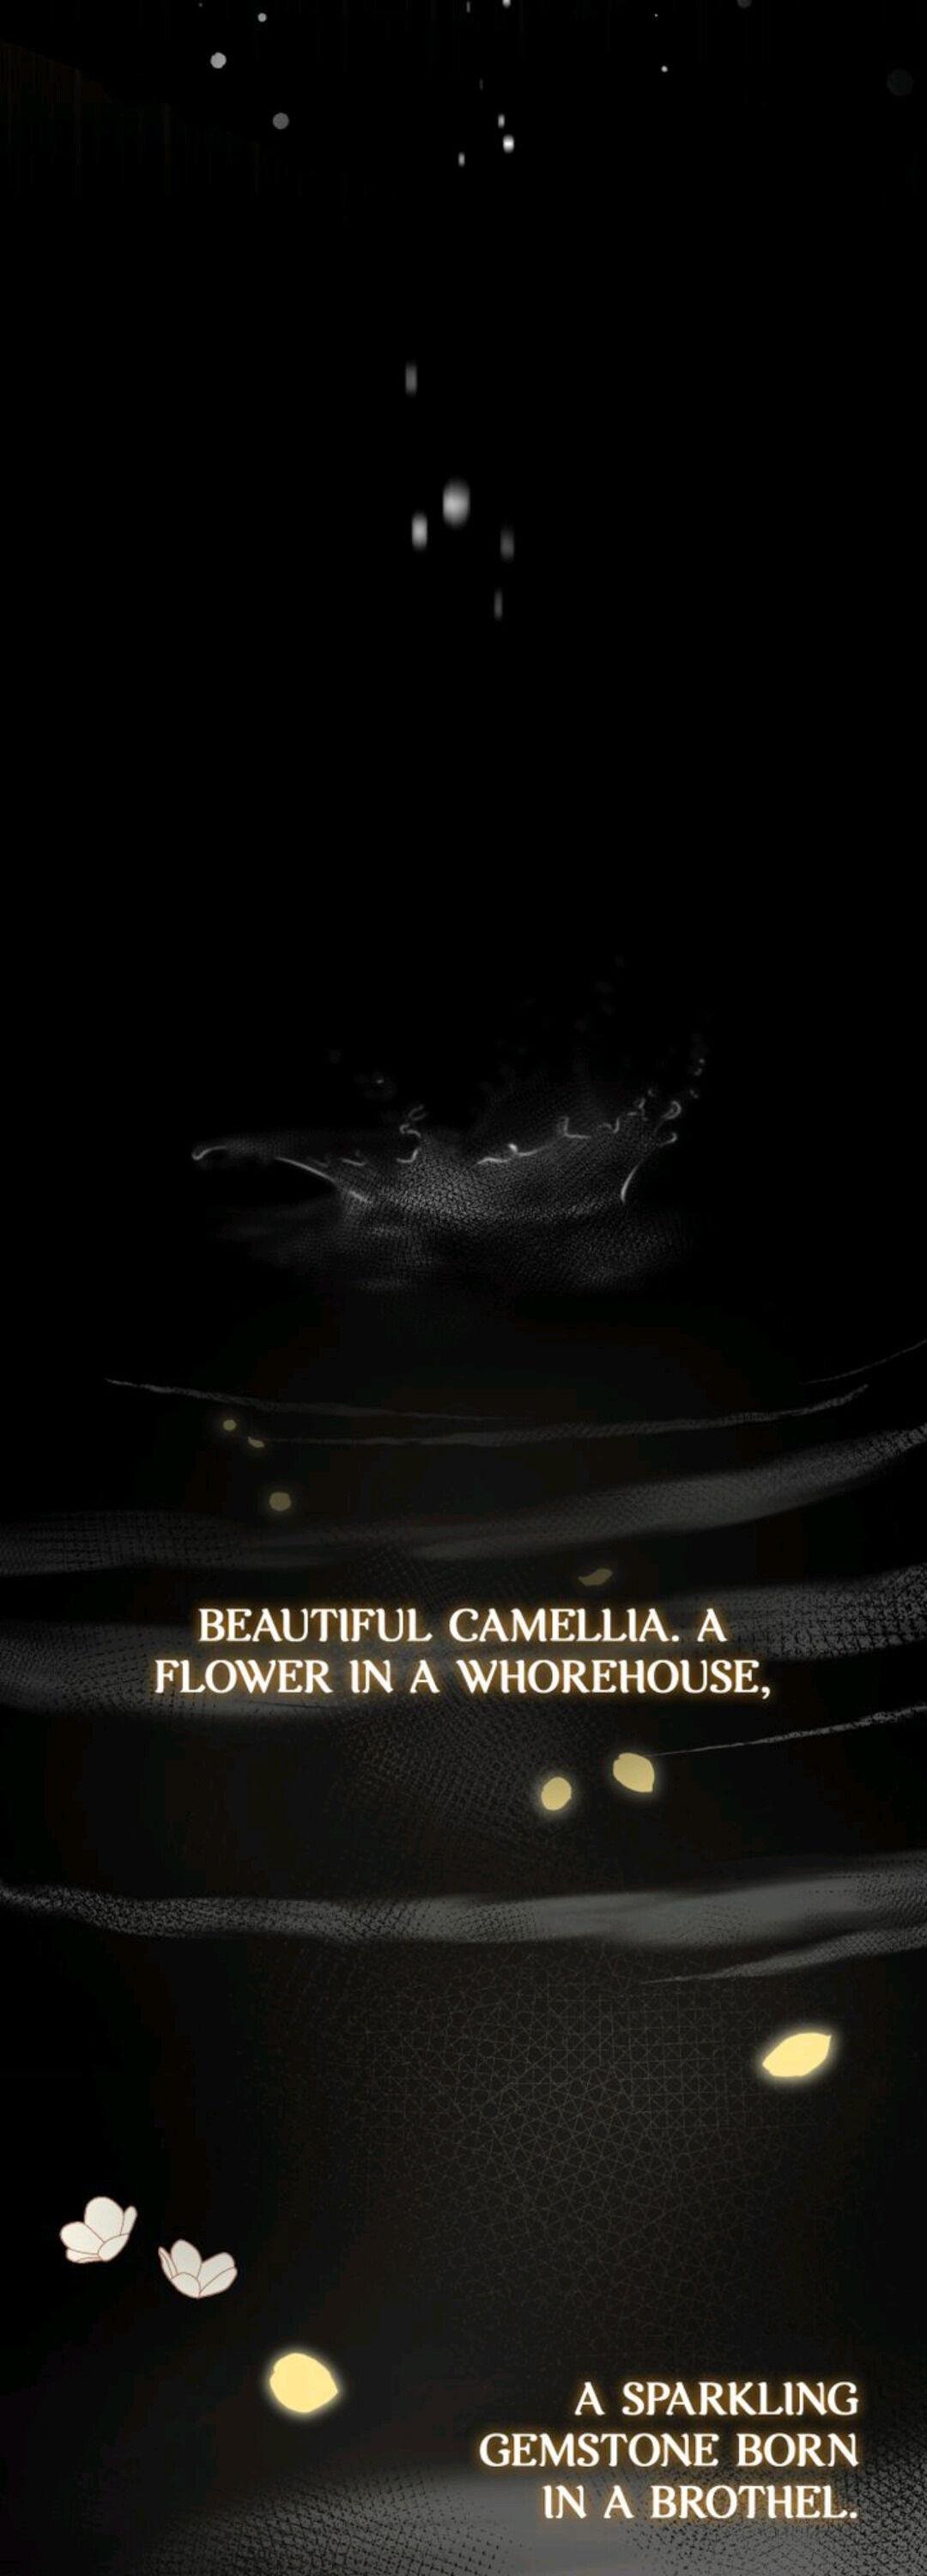 Finding Camellia chapter 0